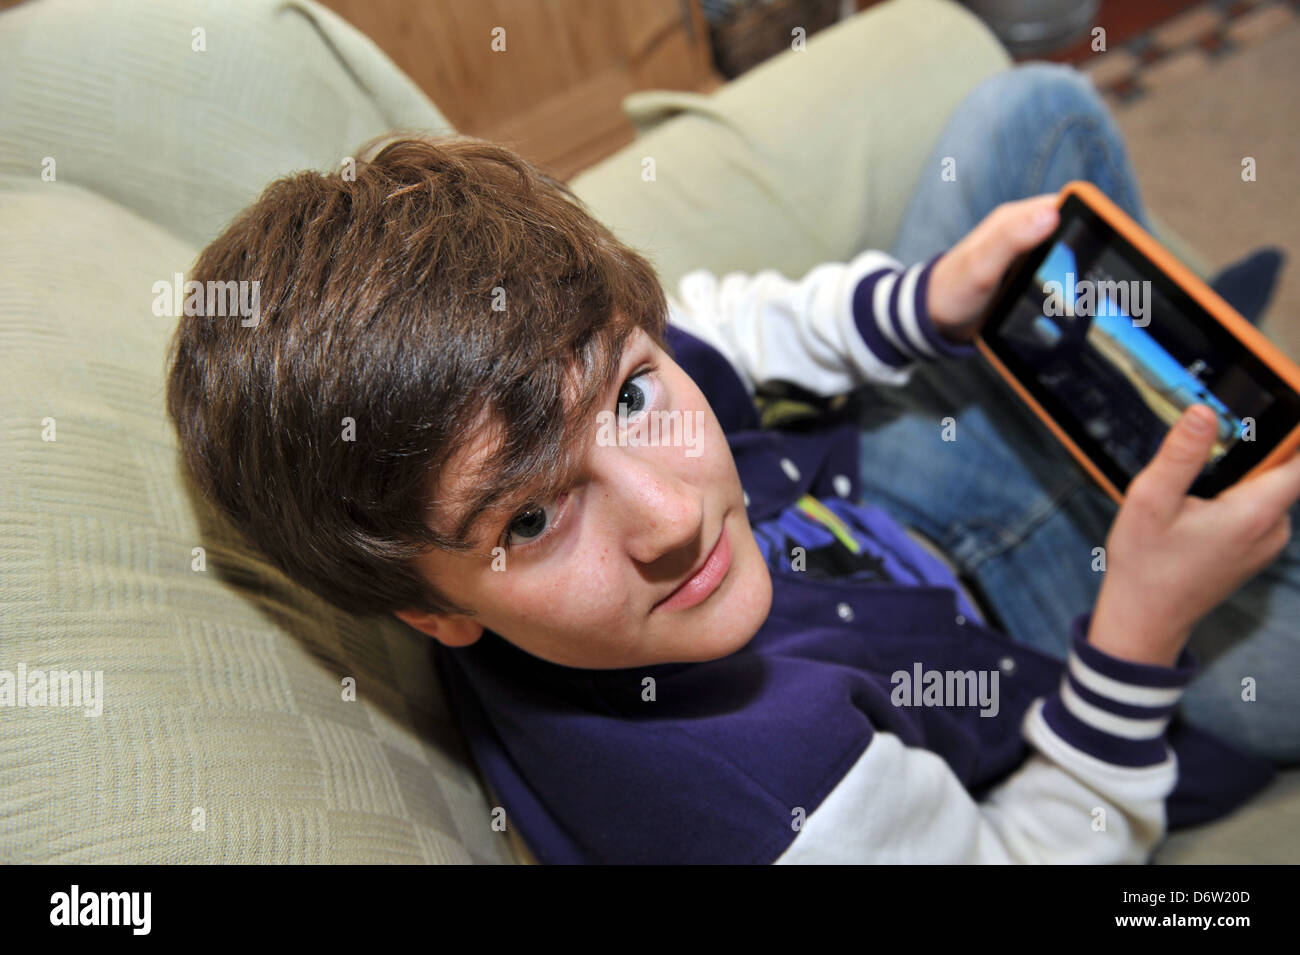 Twelve year old boy playing on a Kindle tablet. Stock Photo